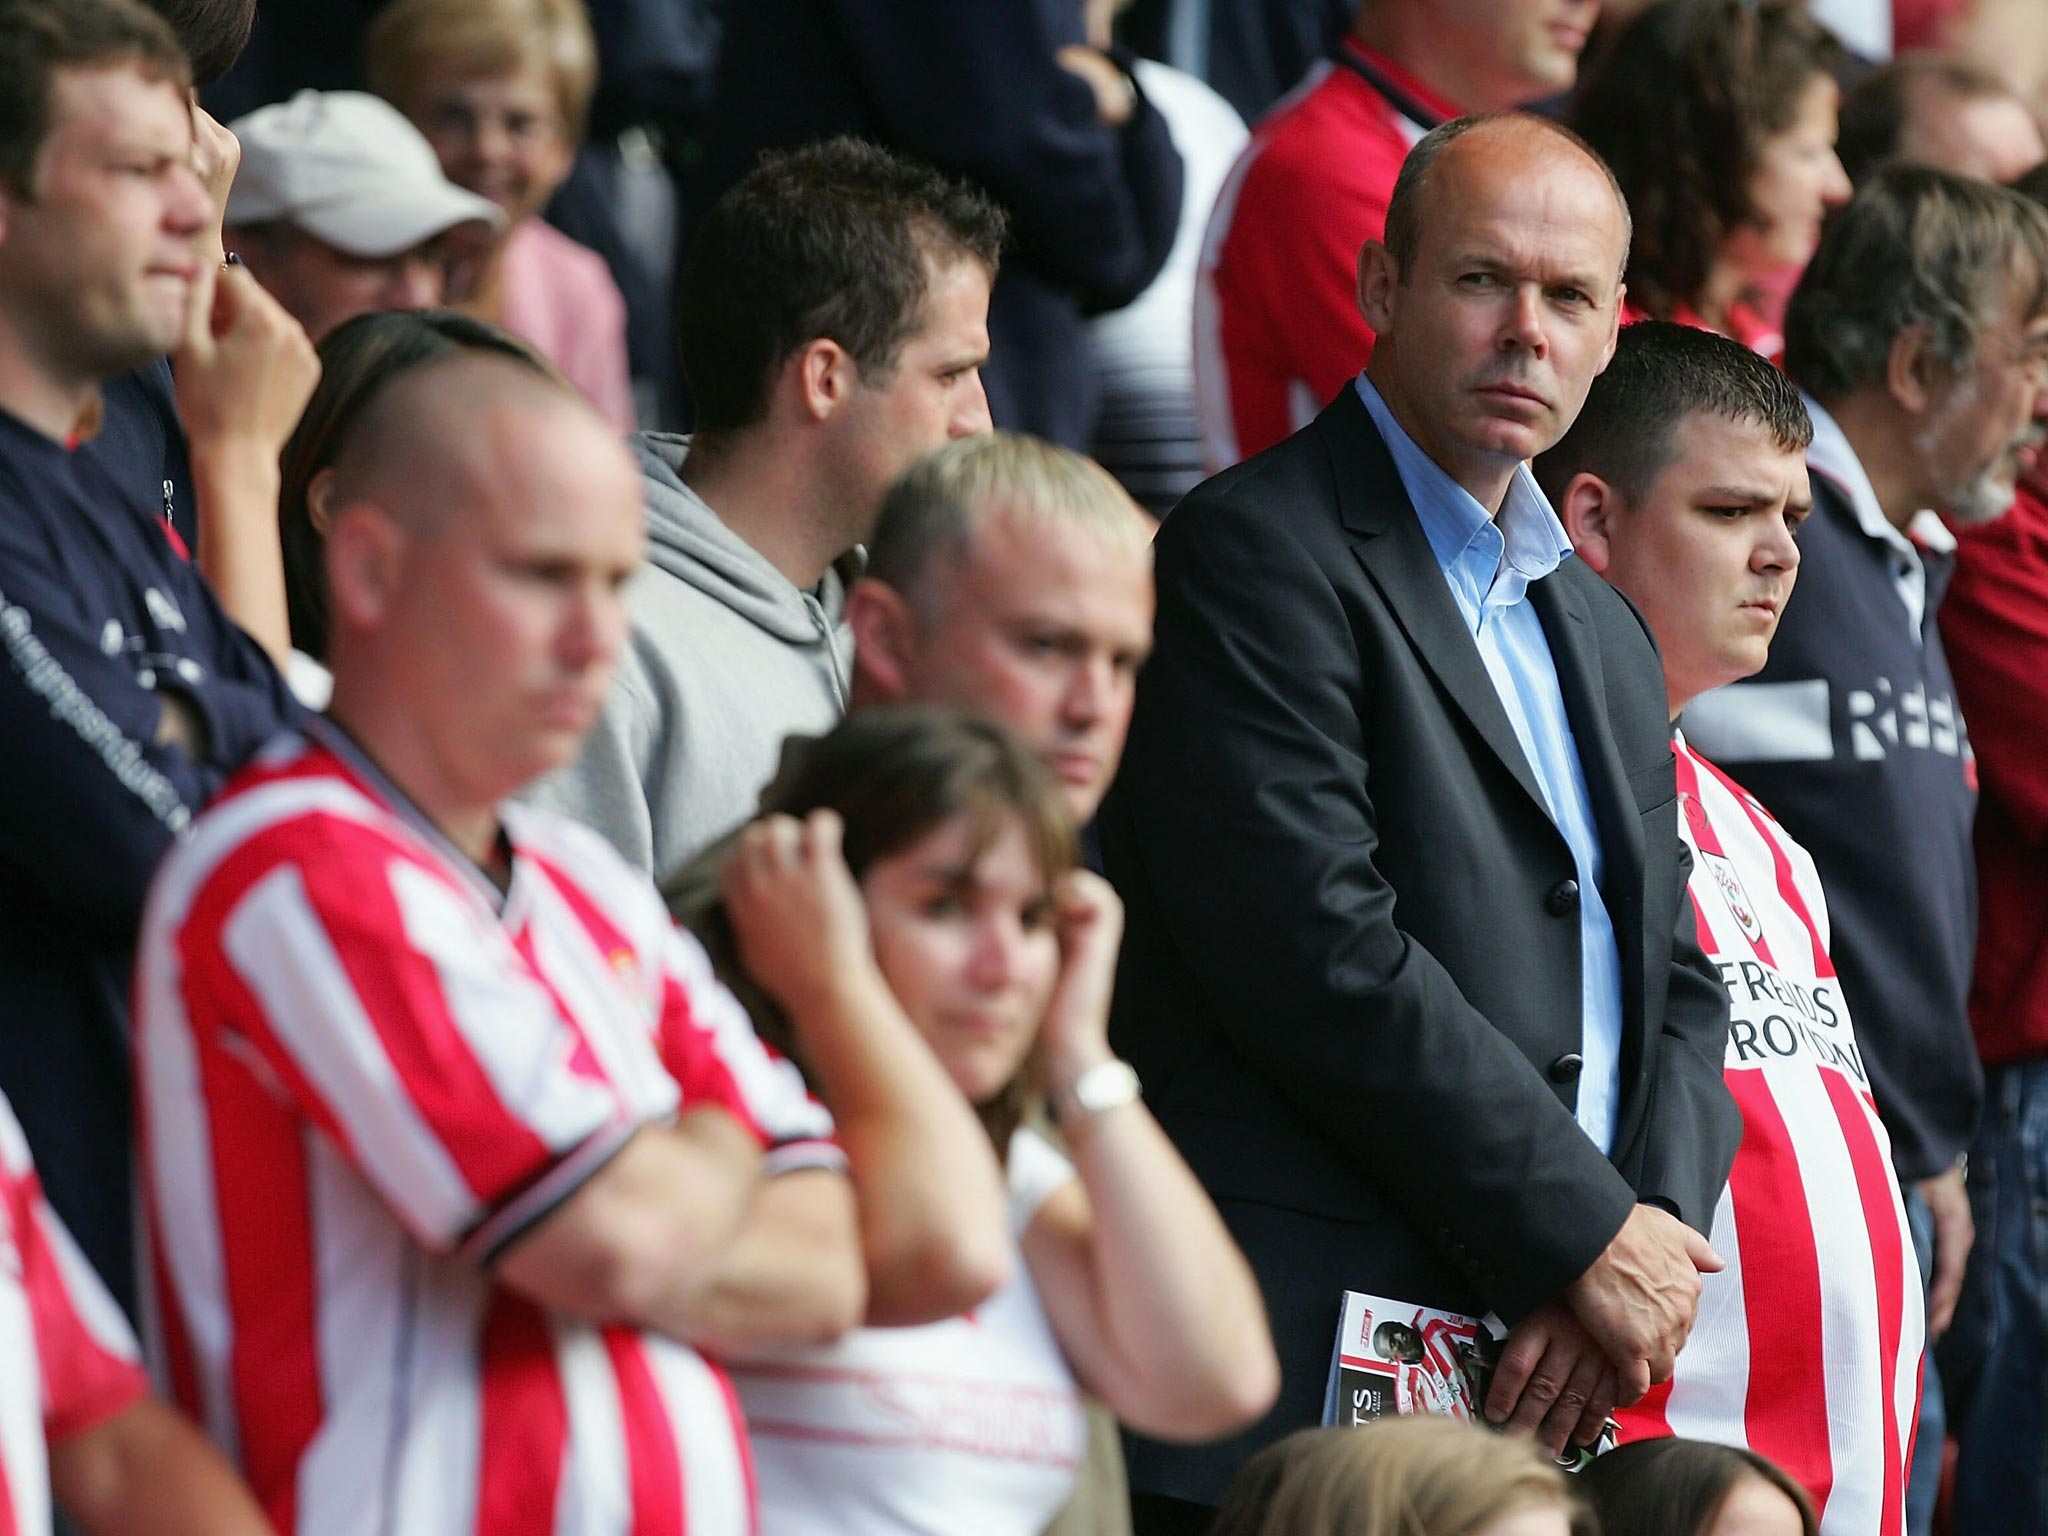 Clive Woodward’s time as technical support director at Southampton was not successful because the cultural fit was wrong